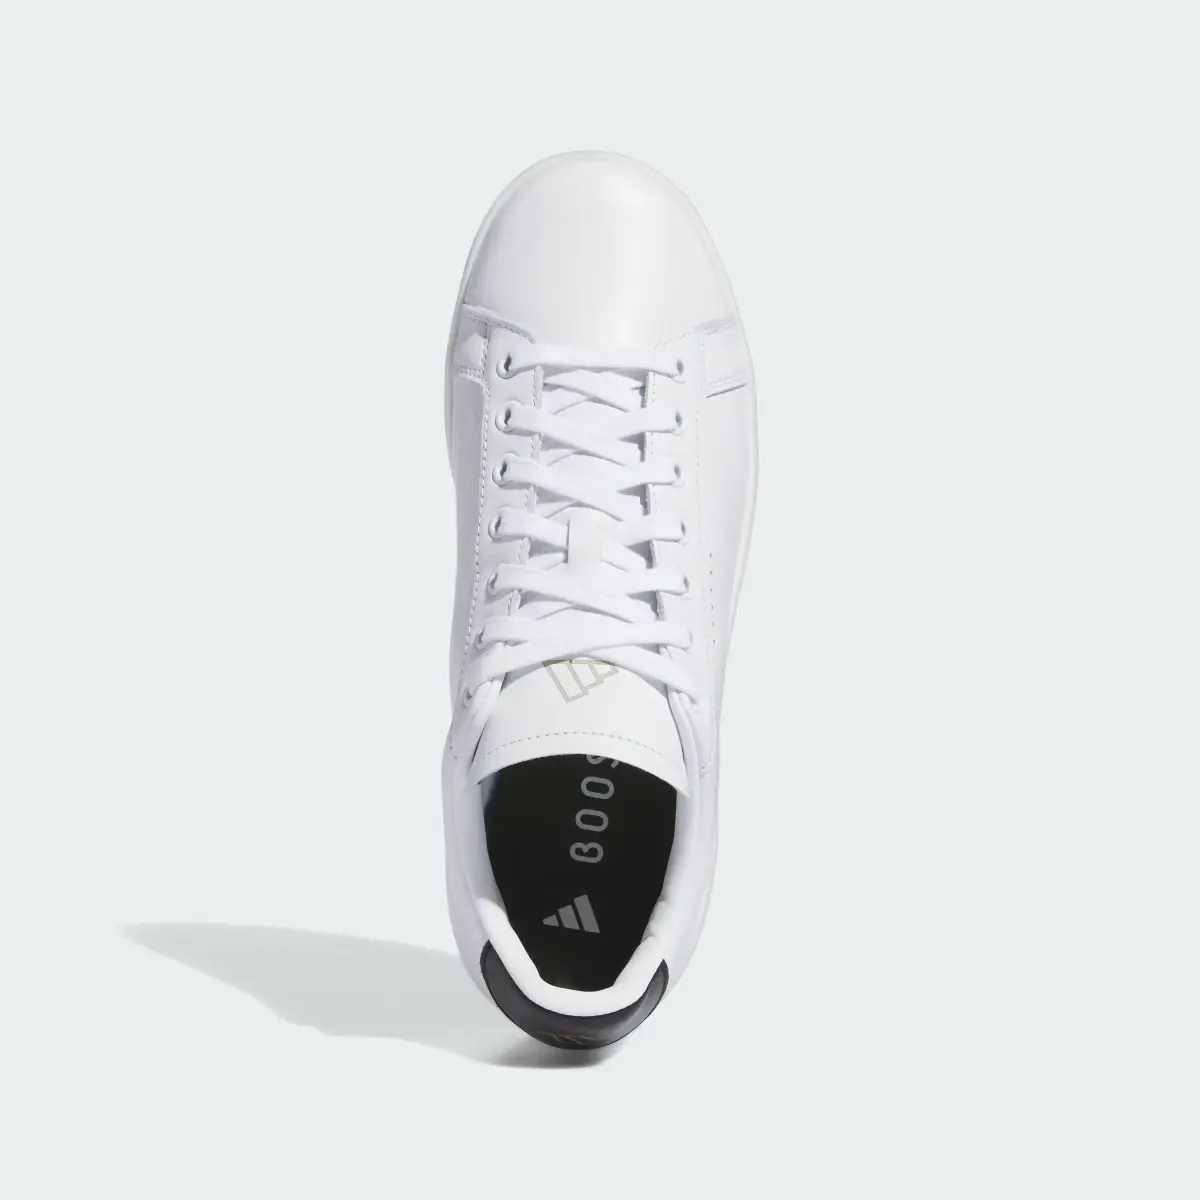 Adidas Go-To Spikeless 2.0 Golf Shoes Low. 3